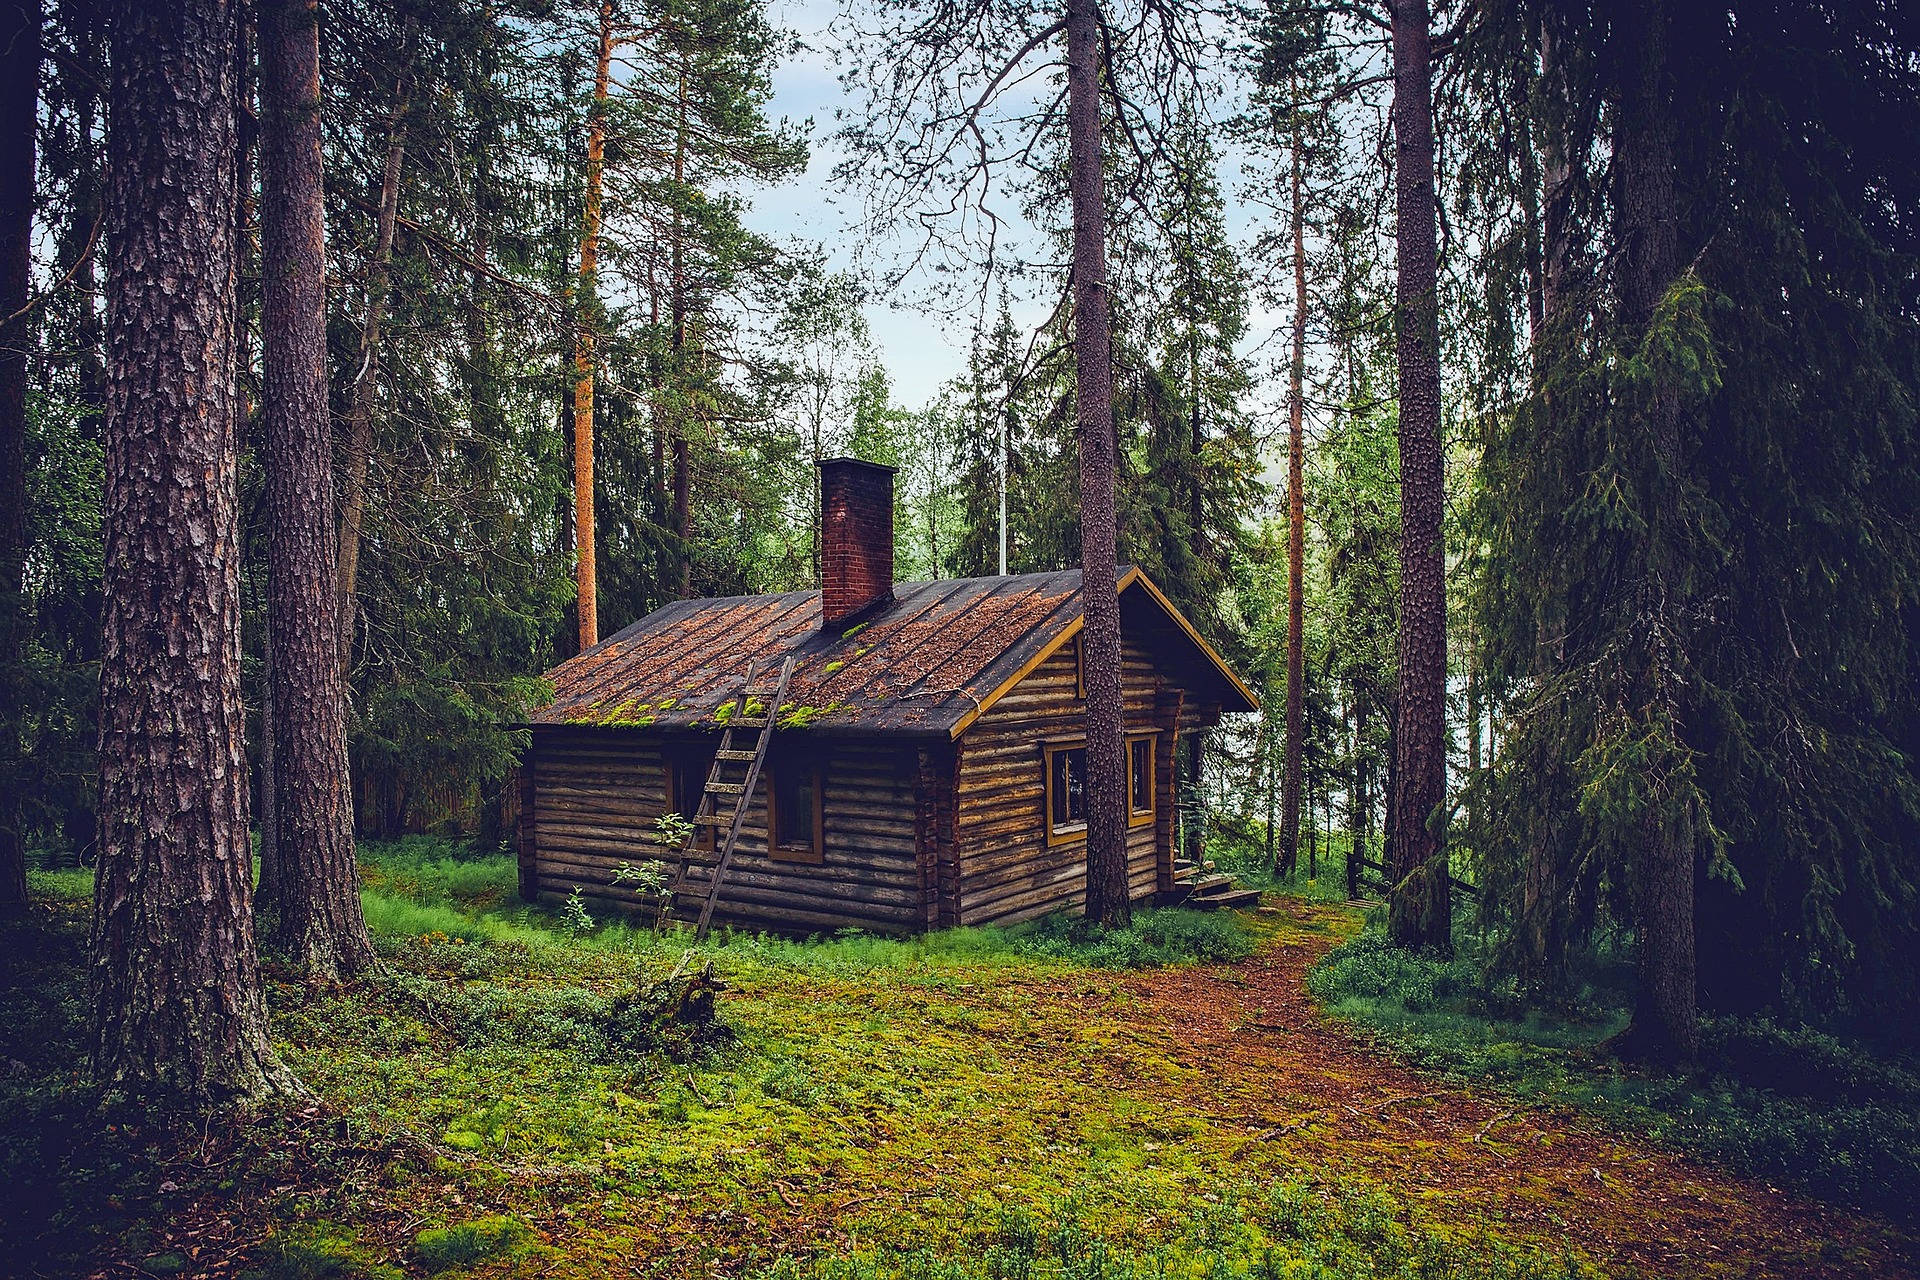 Quaint Cabin In The Woods Background